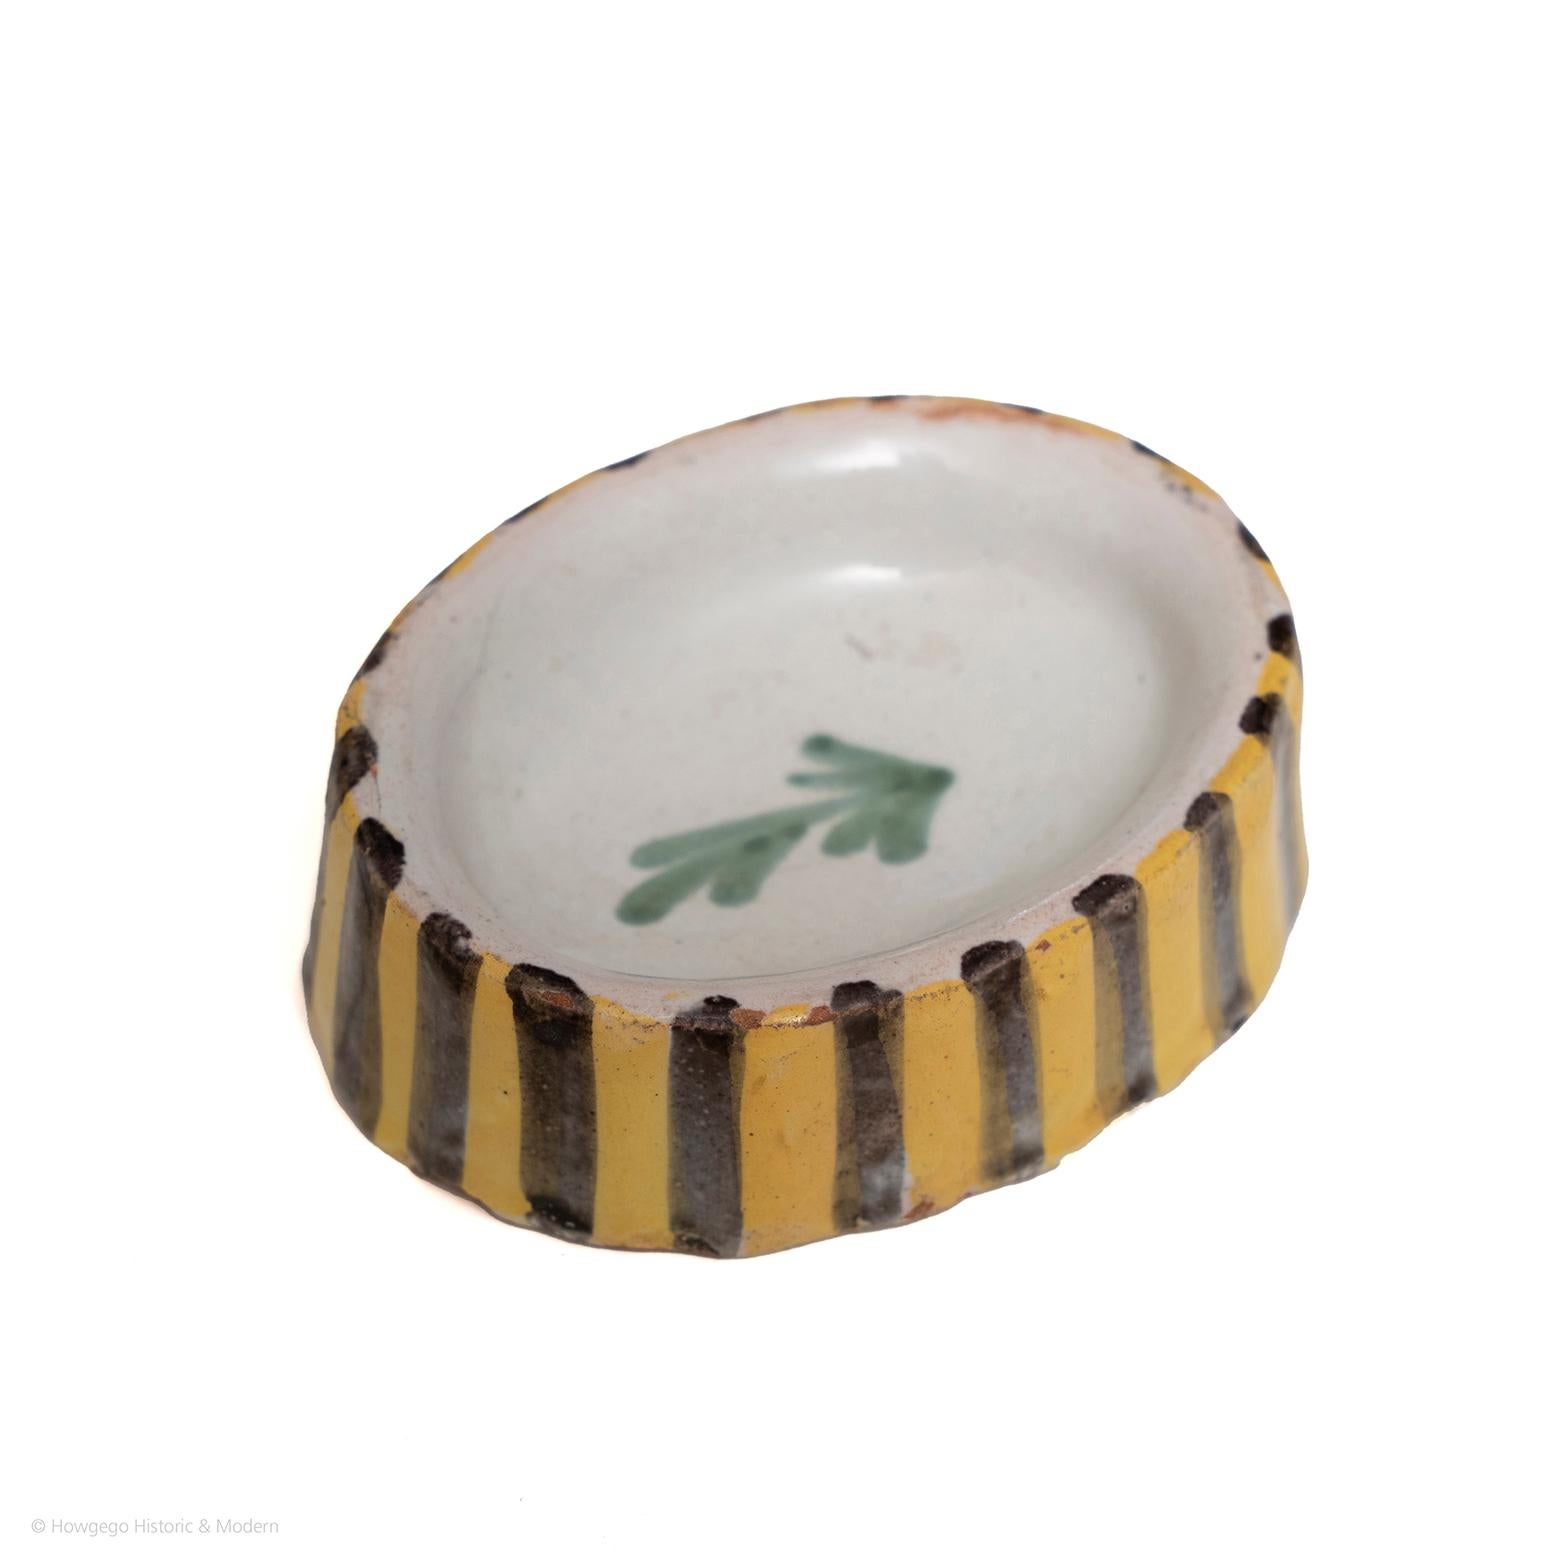 Rare surviving small piece of early tableware. Suitable for everyday use as a charming piece of history for the dining table.

French faience salt. Oval shape with a leafy sprig in the centre and the edge painted with blue and yellow stripes. In